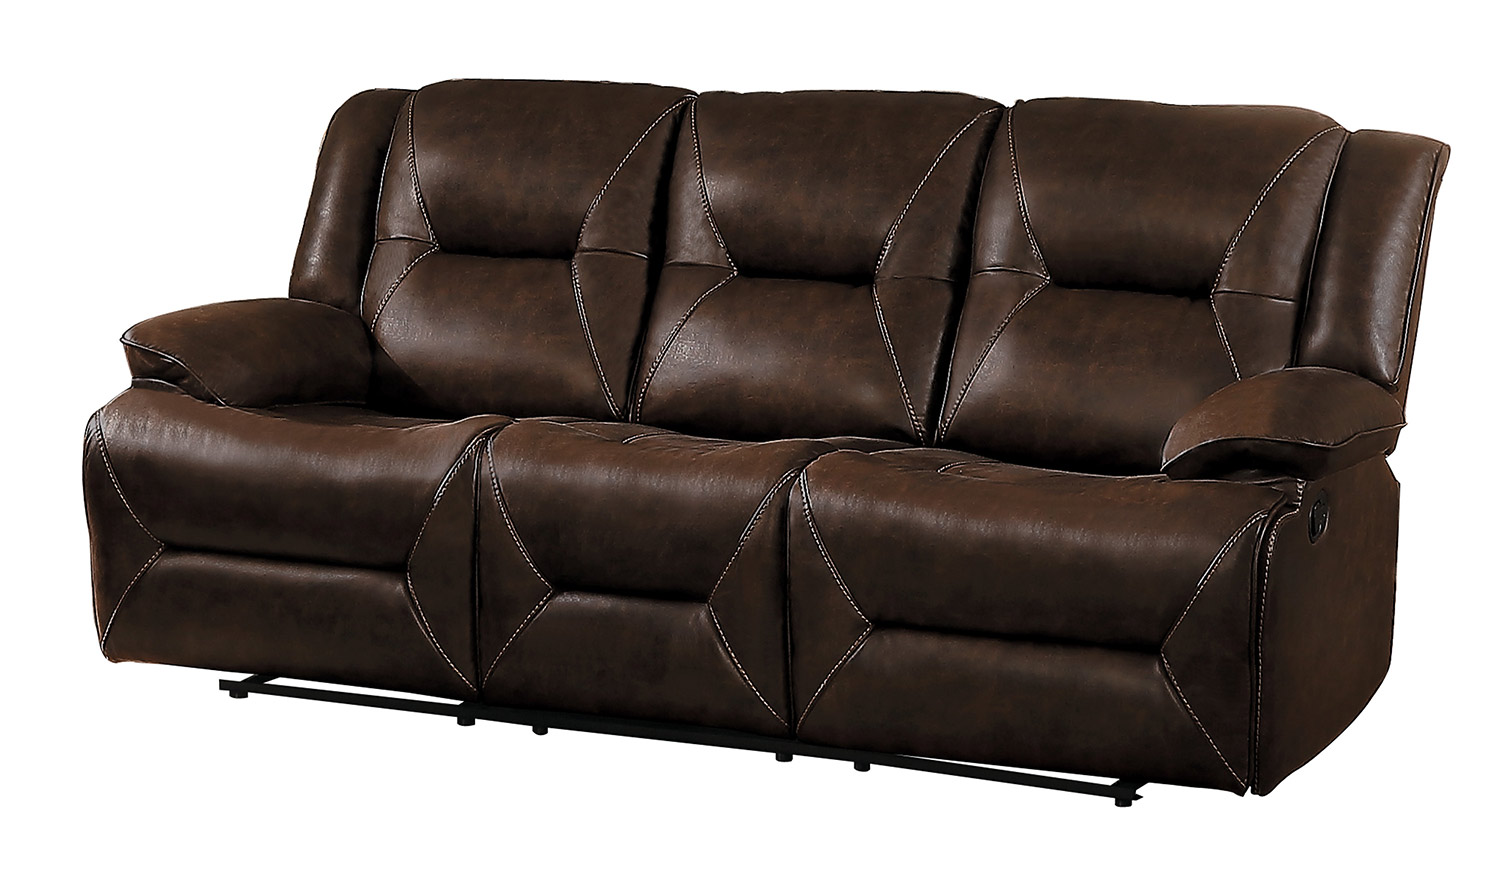 Homelegance Okello Double Reclining Sofa - Brown AireHyde Match